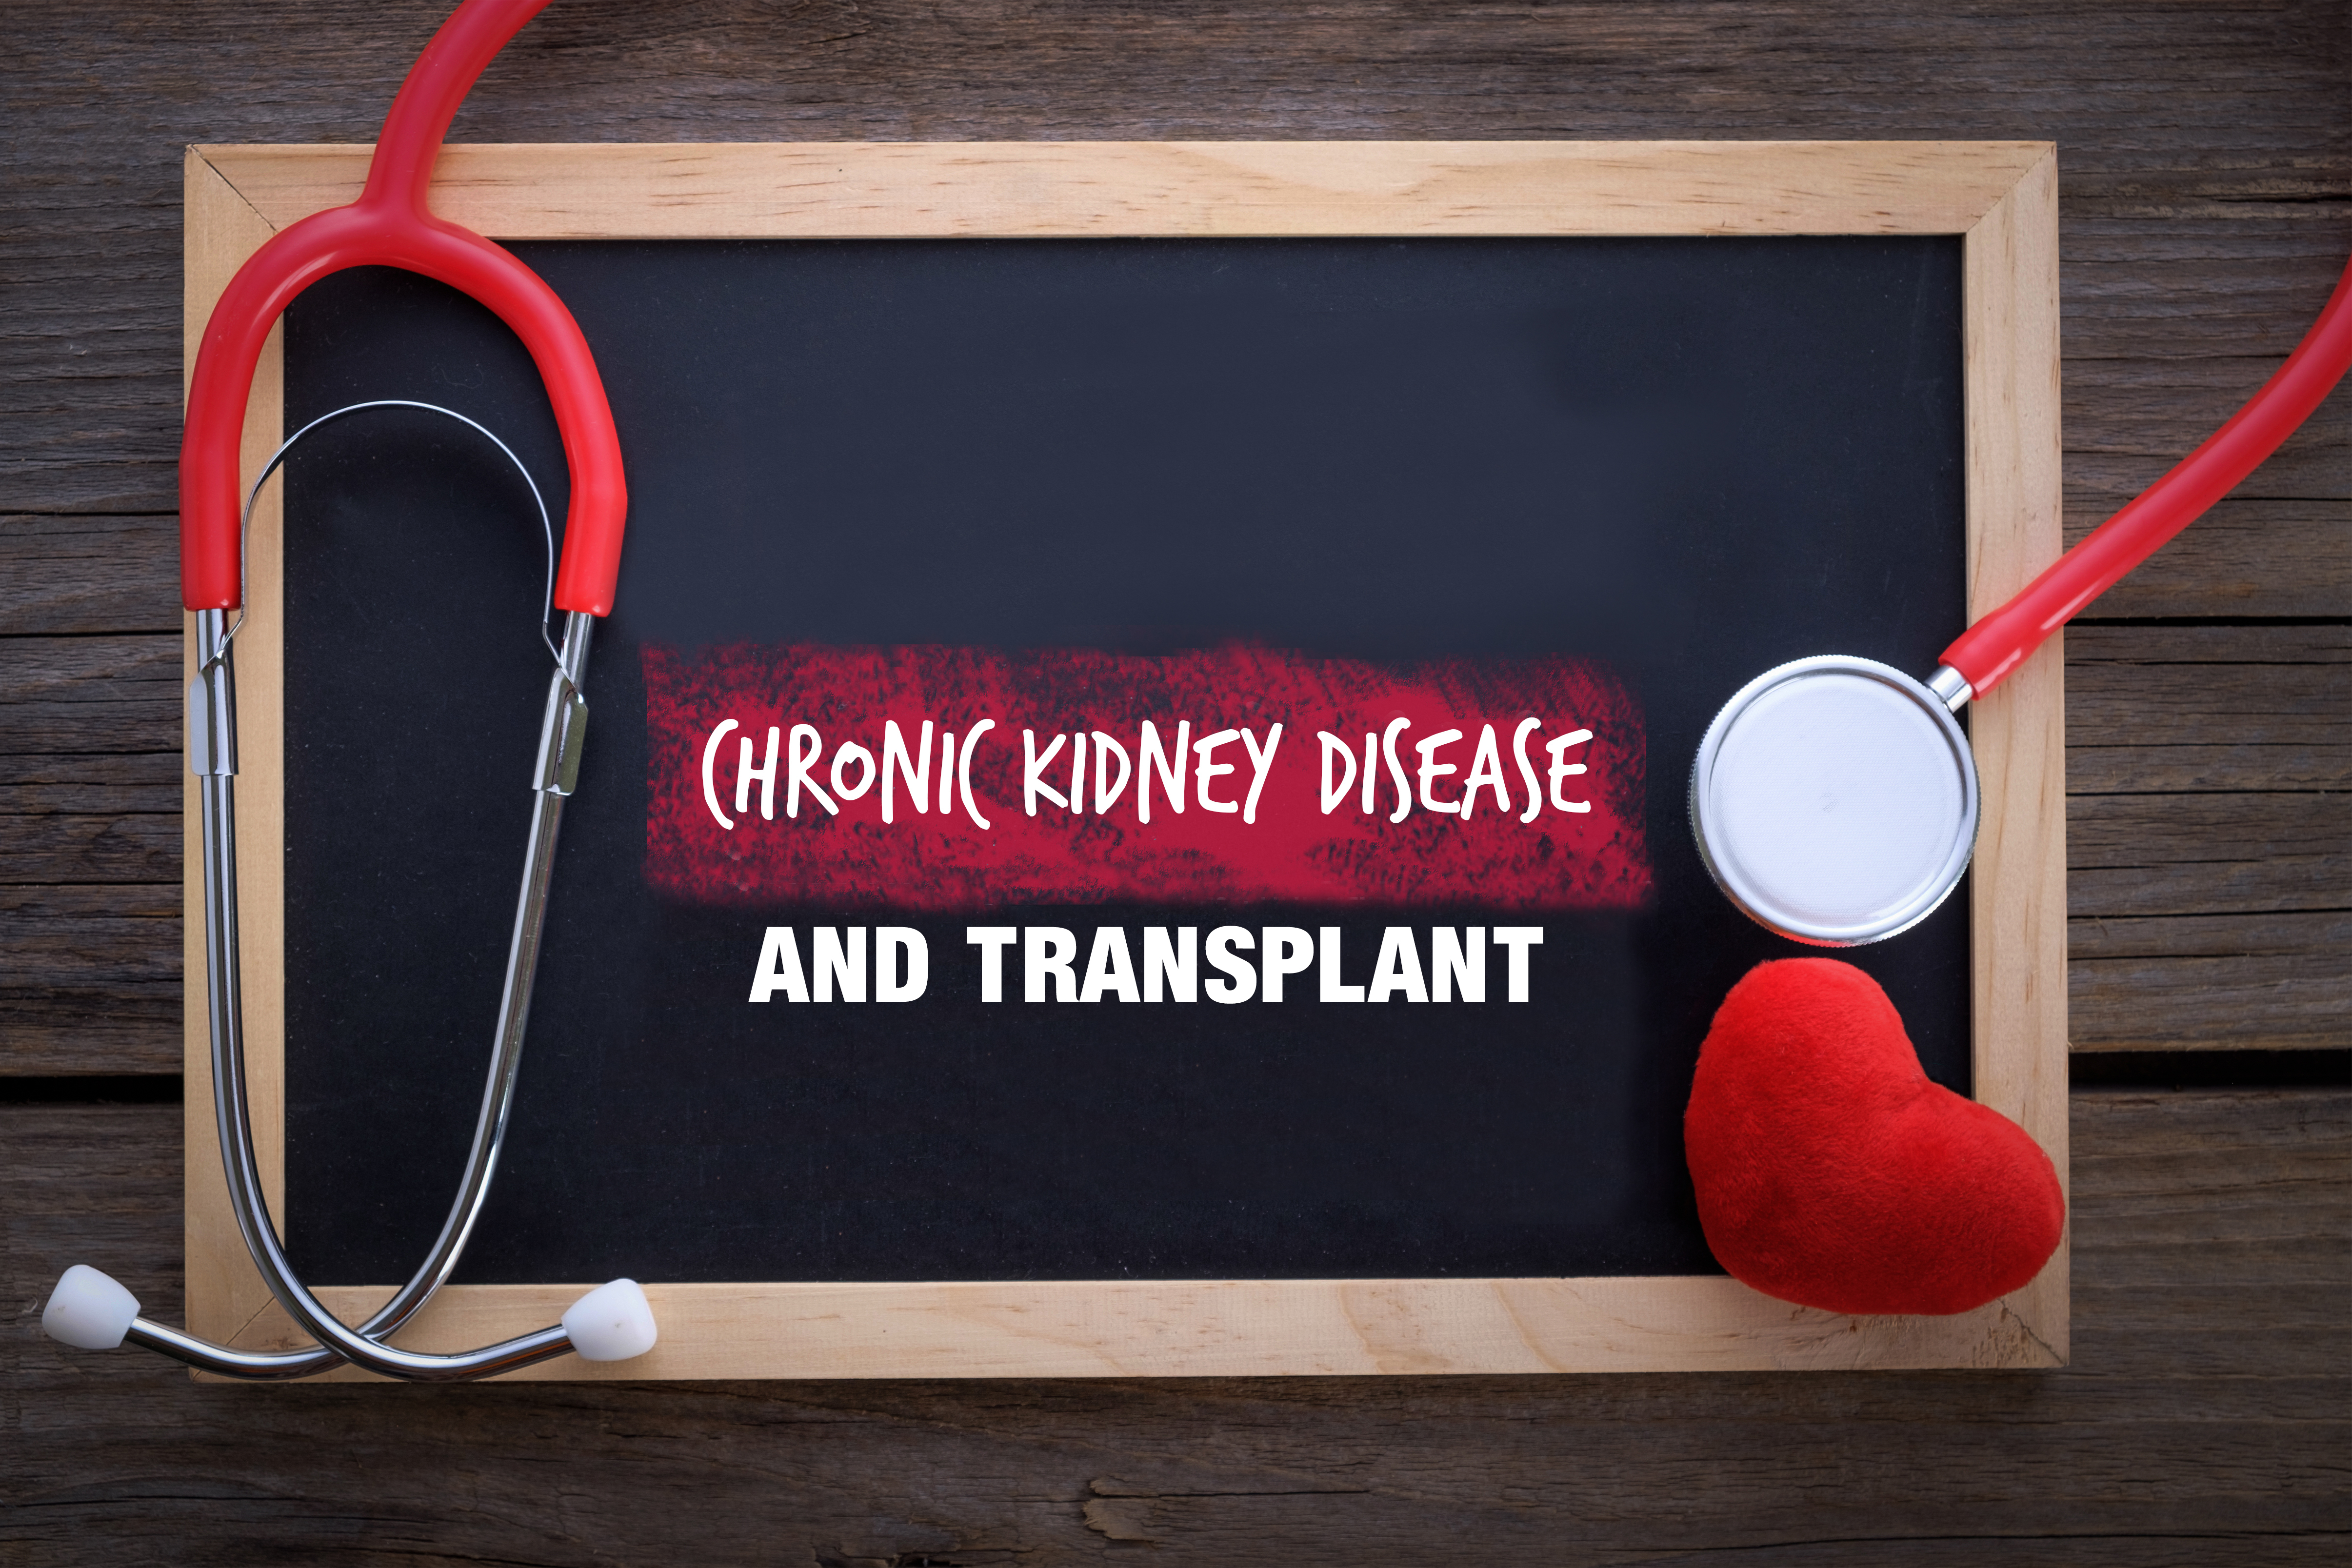 All you need to know about chronic kidney diseases and transplant